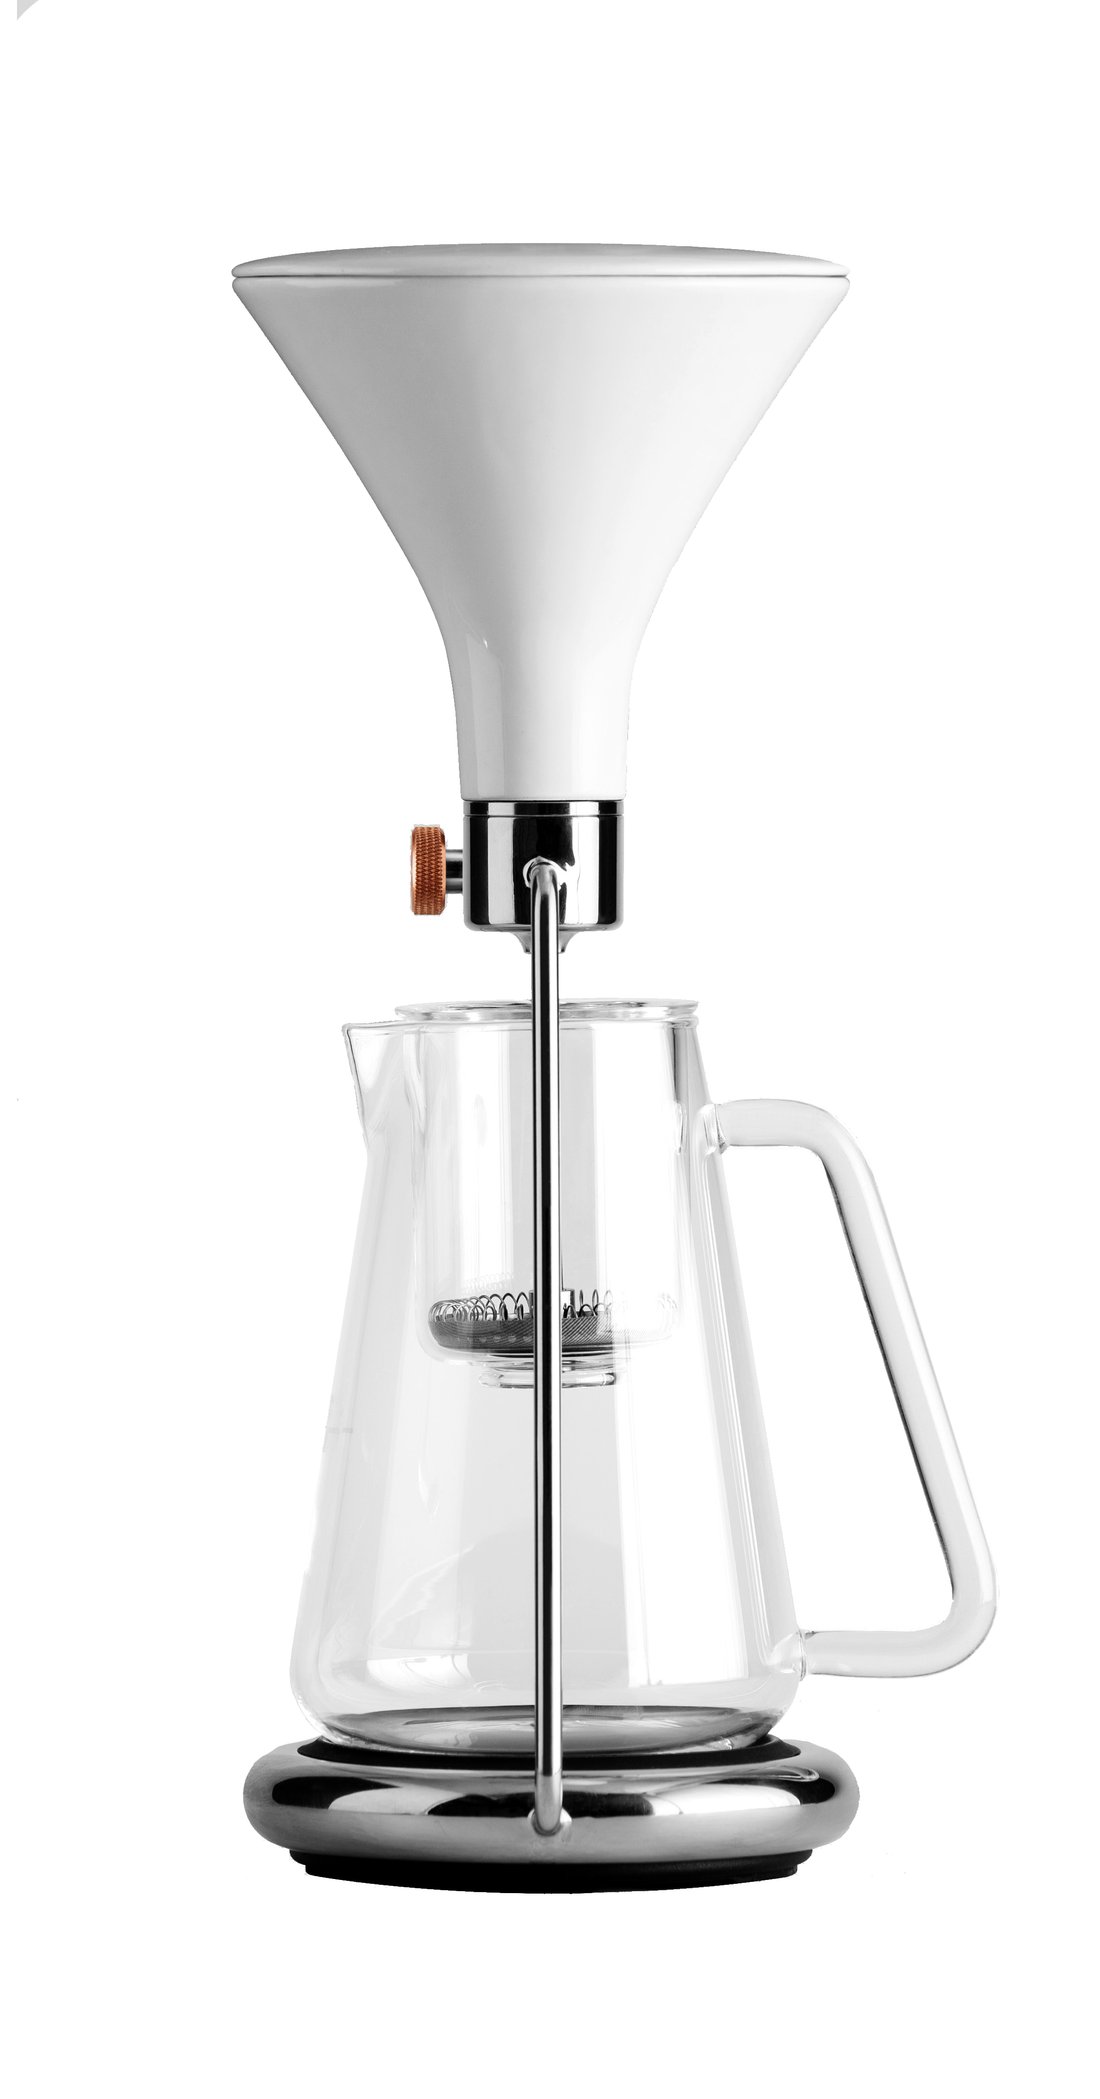 Goat Story GINA Smart Coffee Maker in Stainless Steel